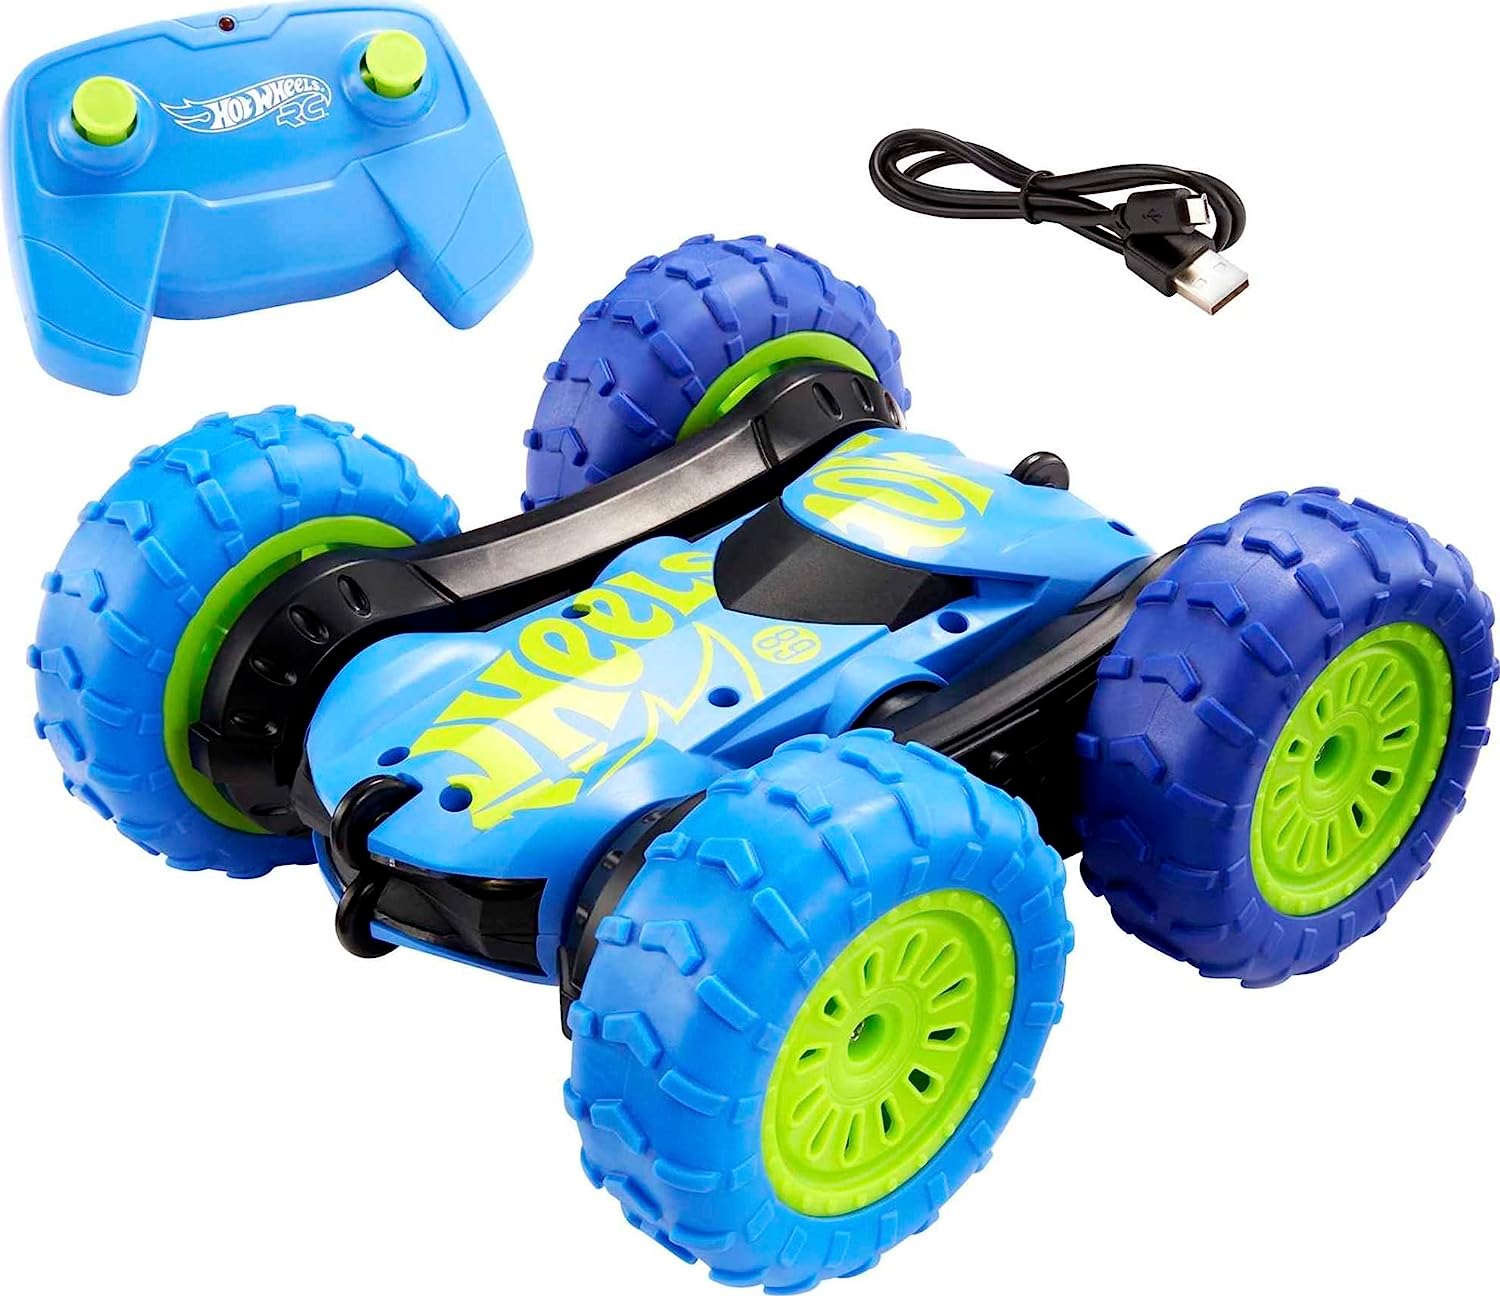 Hot Wheels Twist Shifter Remote Control Toy Vehicle w/ Headlights $13 + Free Shipping w/ Prime or on $25+